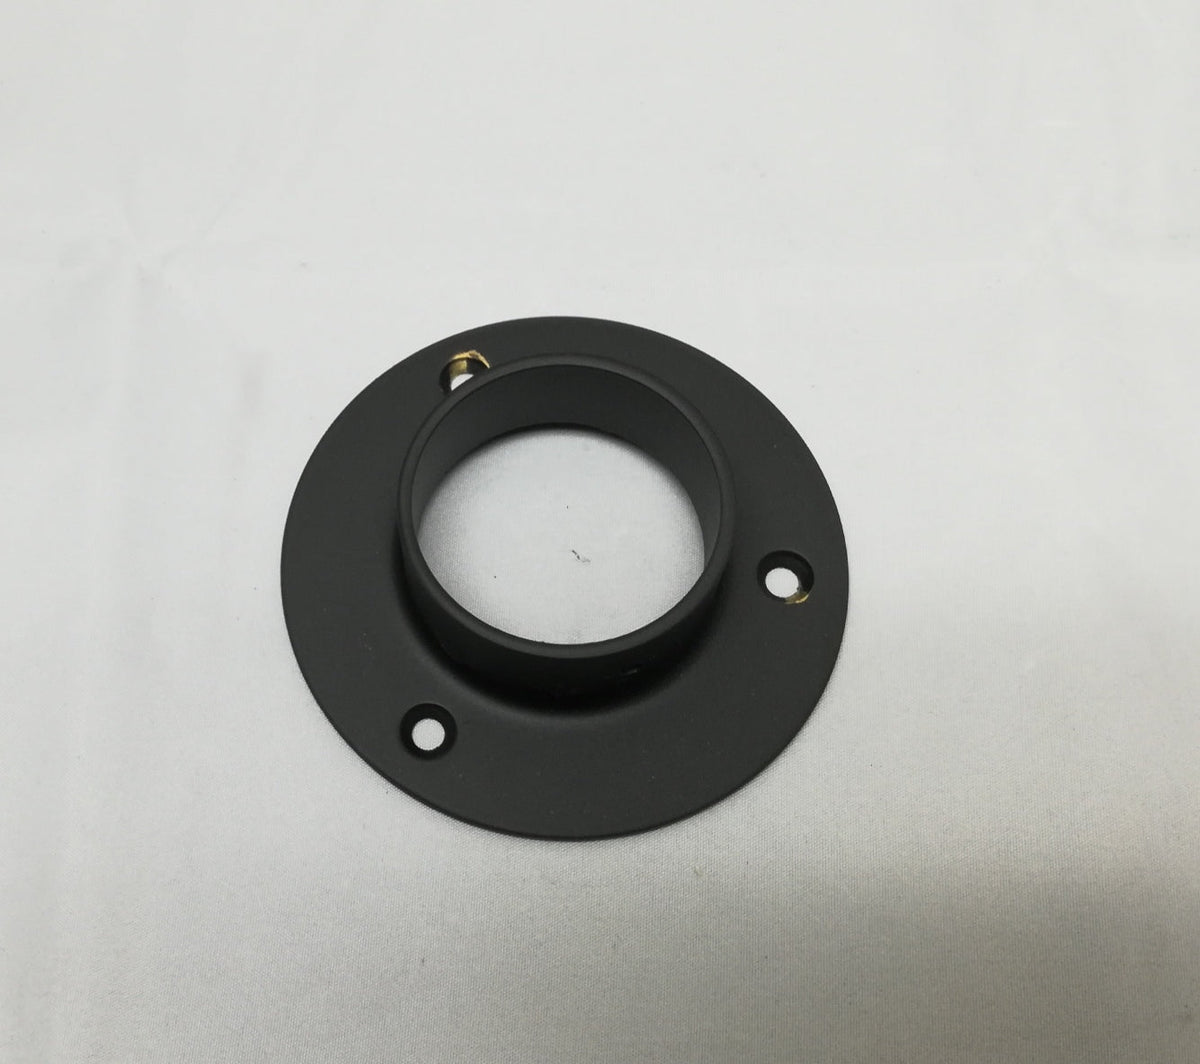 Floor Flange for 1-1/2" Tubing FLANGES AND ANCHORS,COMPONENTS FOR 1-1/2" OD TUBING MatteBlackPowderCoatedFinish Trade Diversified